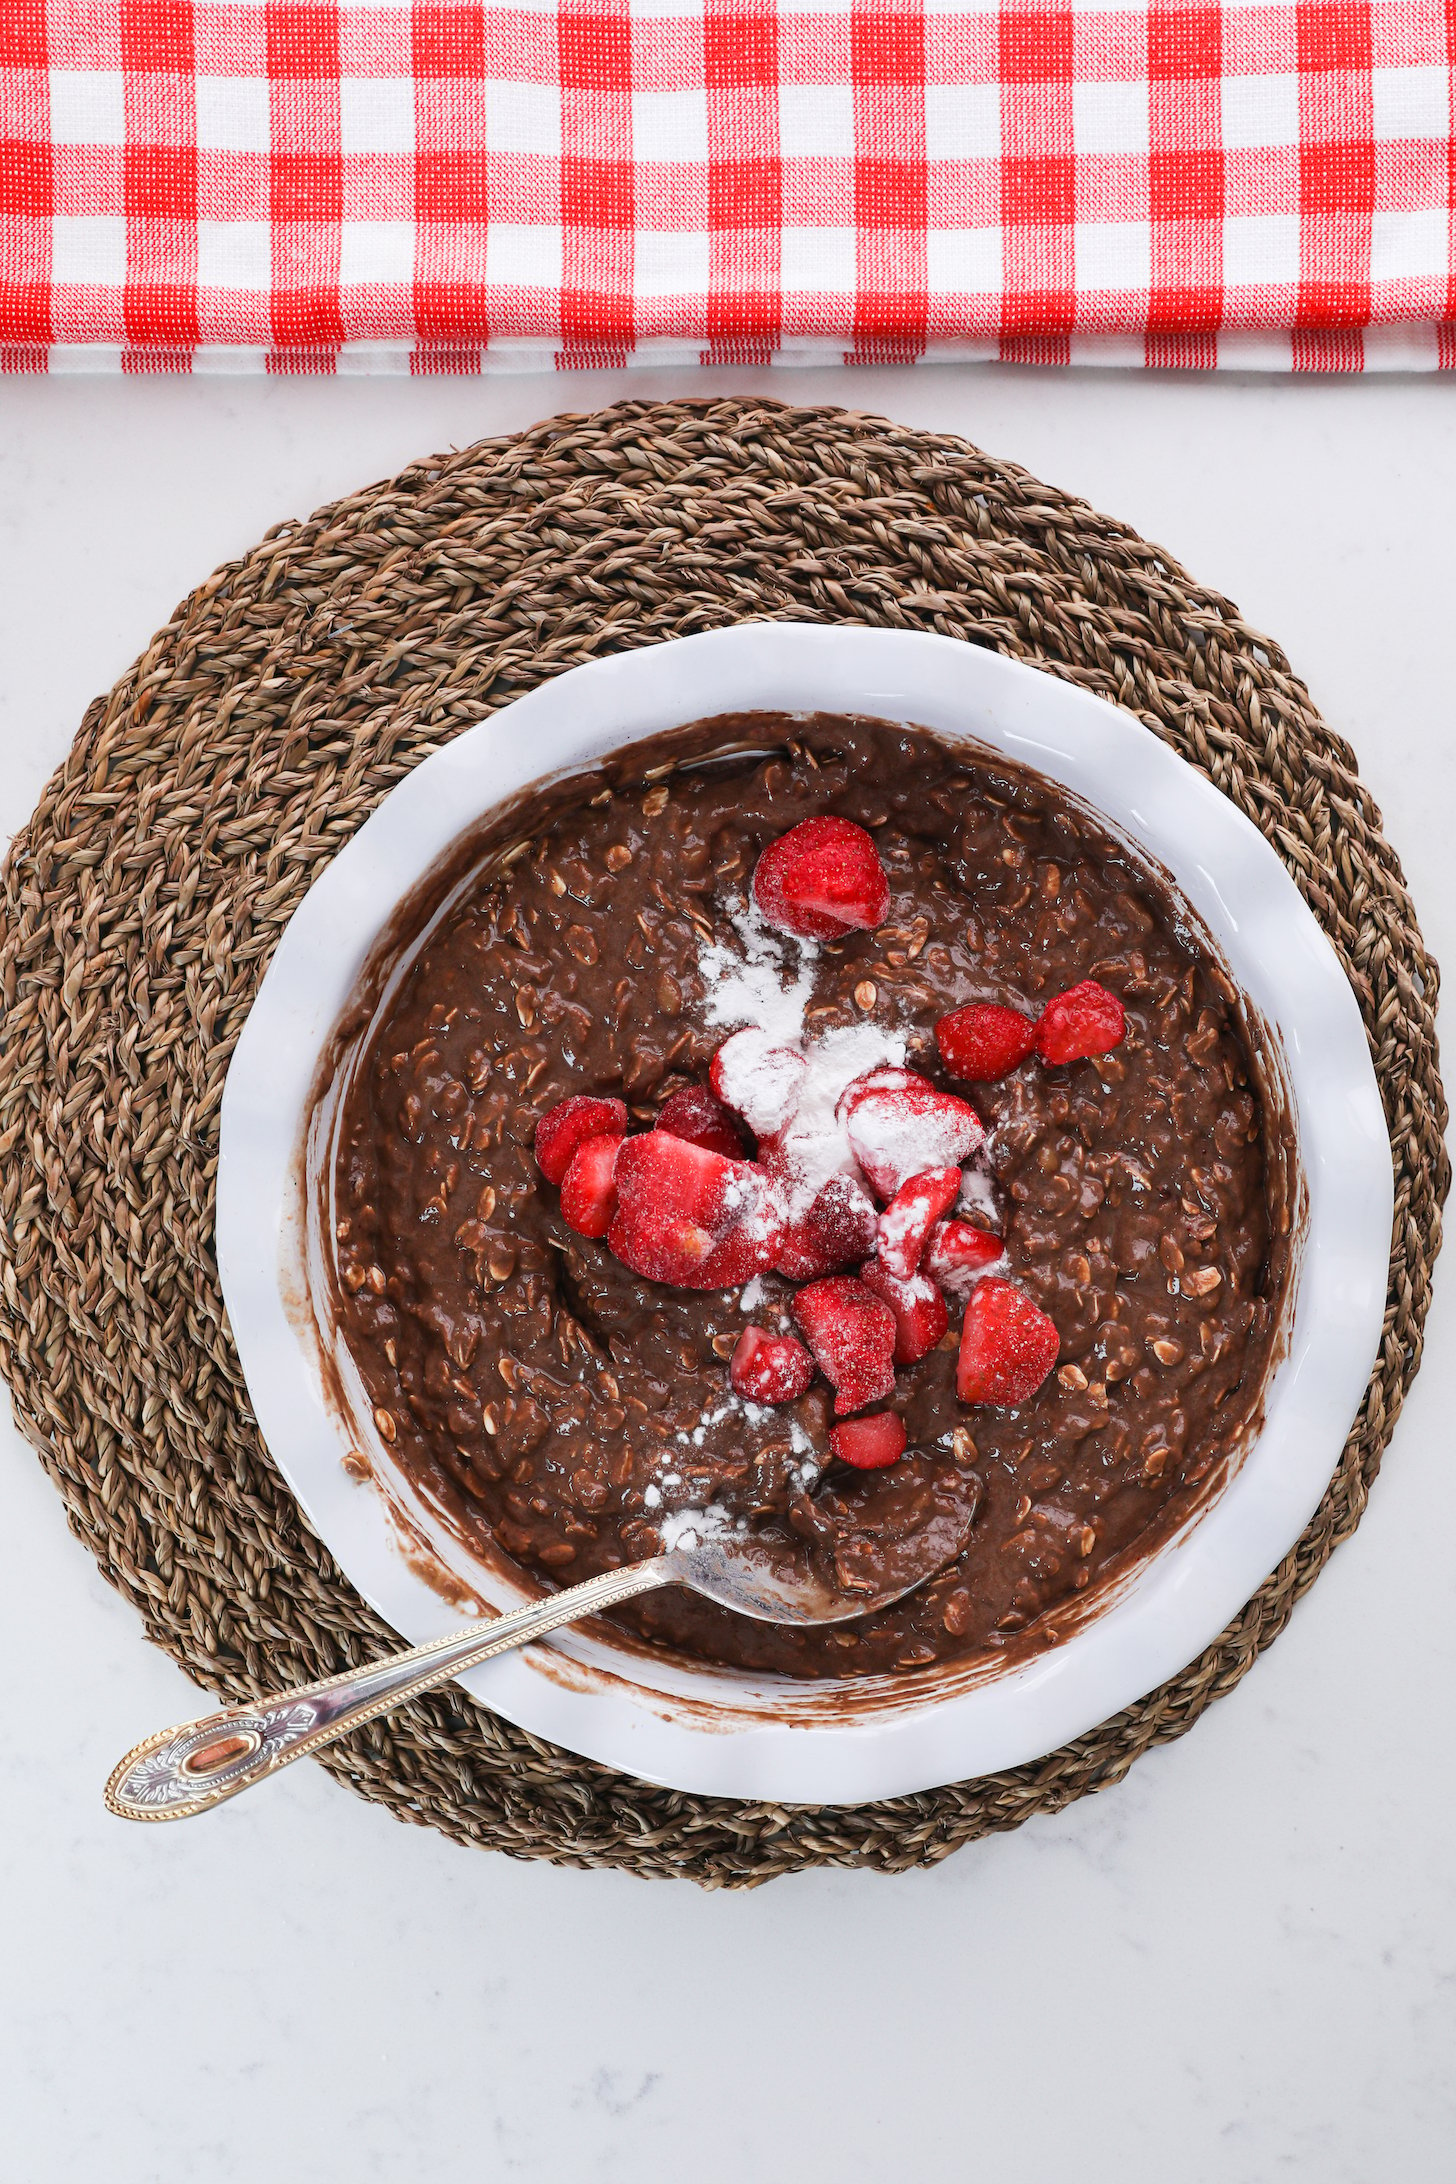 Bowl of chocolate oats topped with frozen strawberries and a white powder.